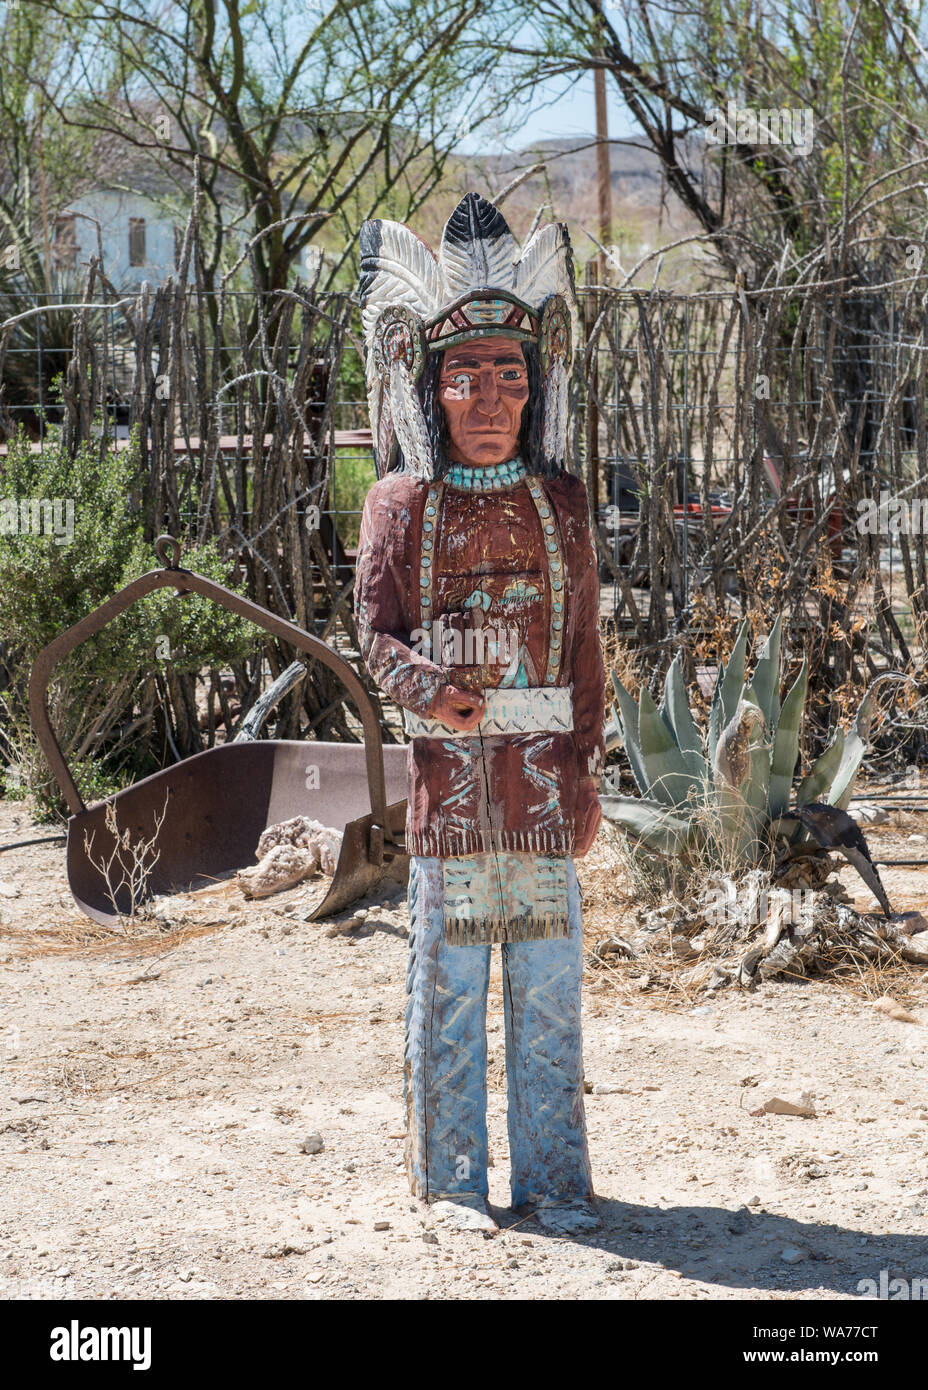 A carved indian figure near the ghost town, some of which is still occupied and some of which consists of ruins of the Chisos quicksilver-mining company which operated from 1905 into the early 1940s, and the residences of those who worked there. Terlingua, Texas Stock Photo